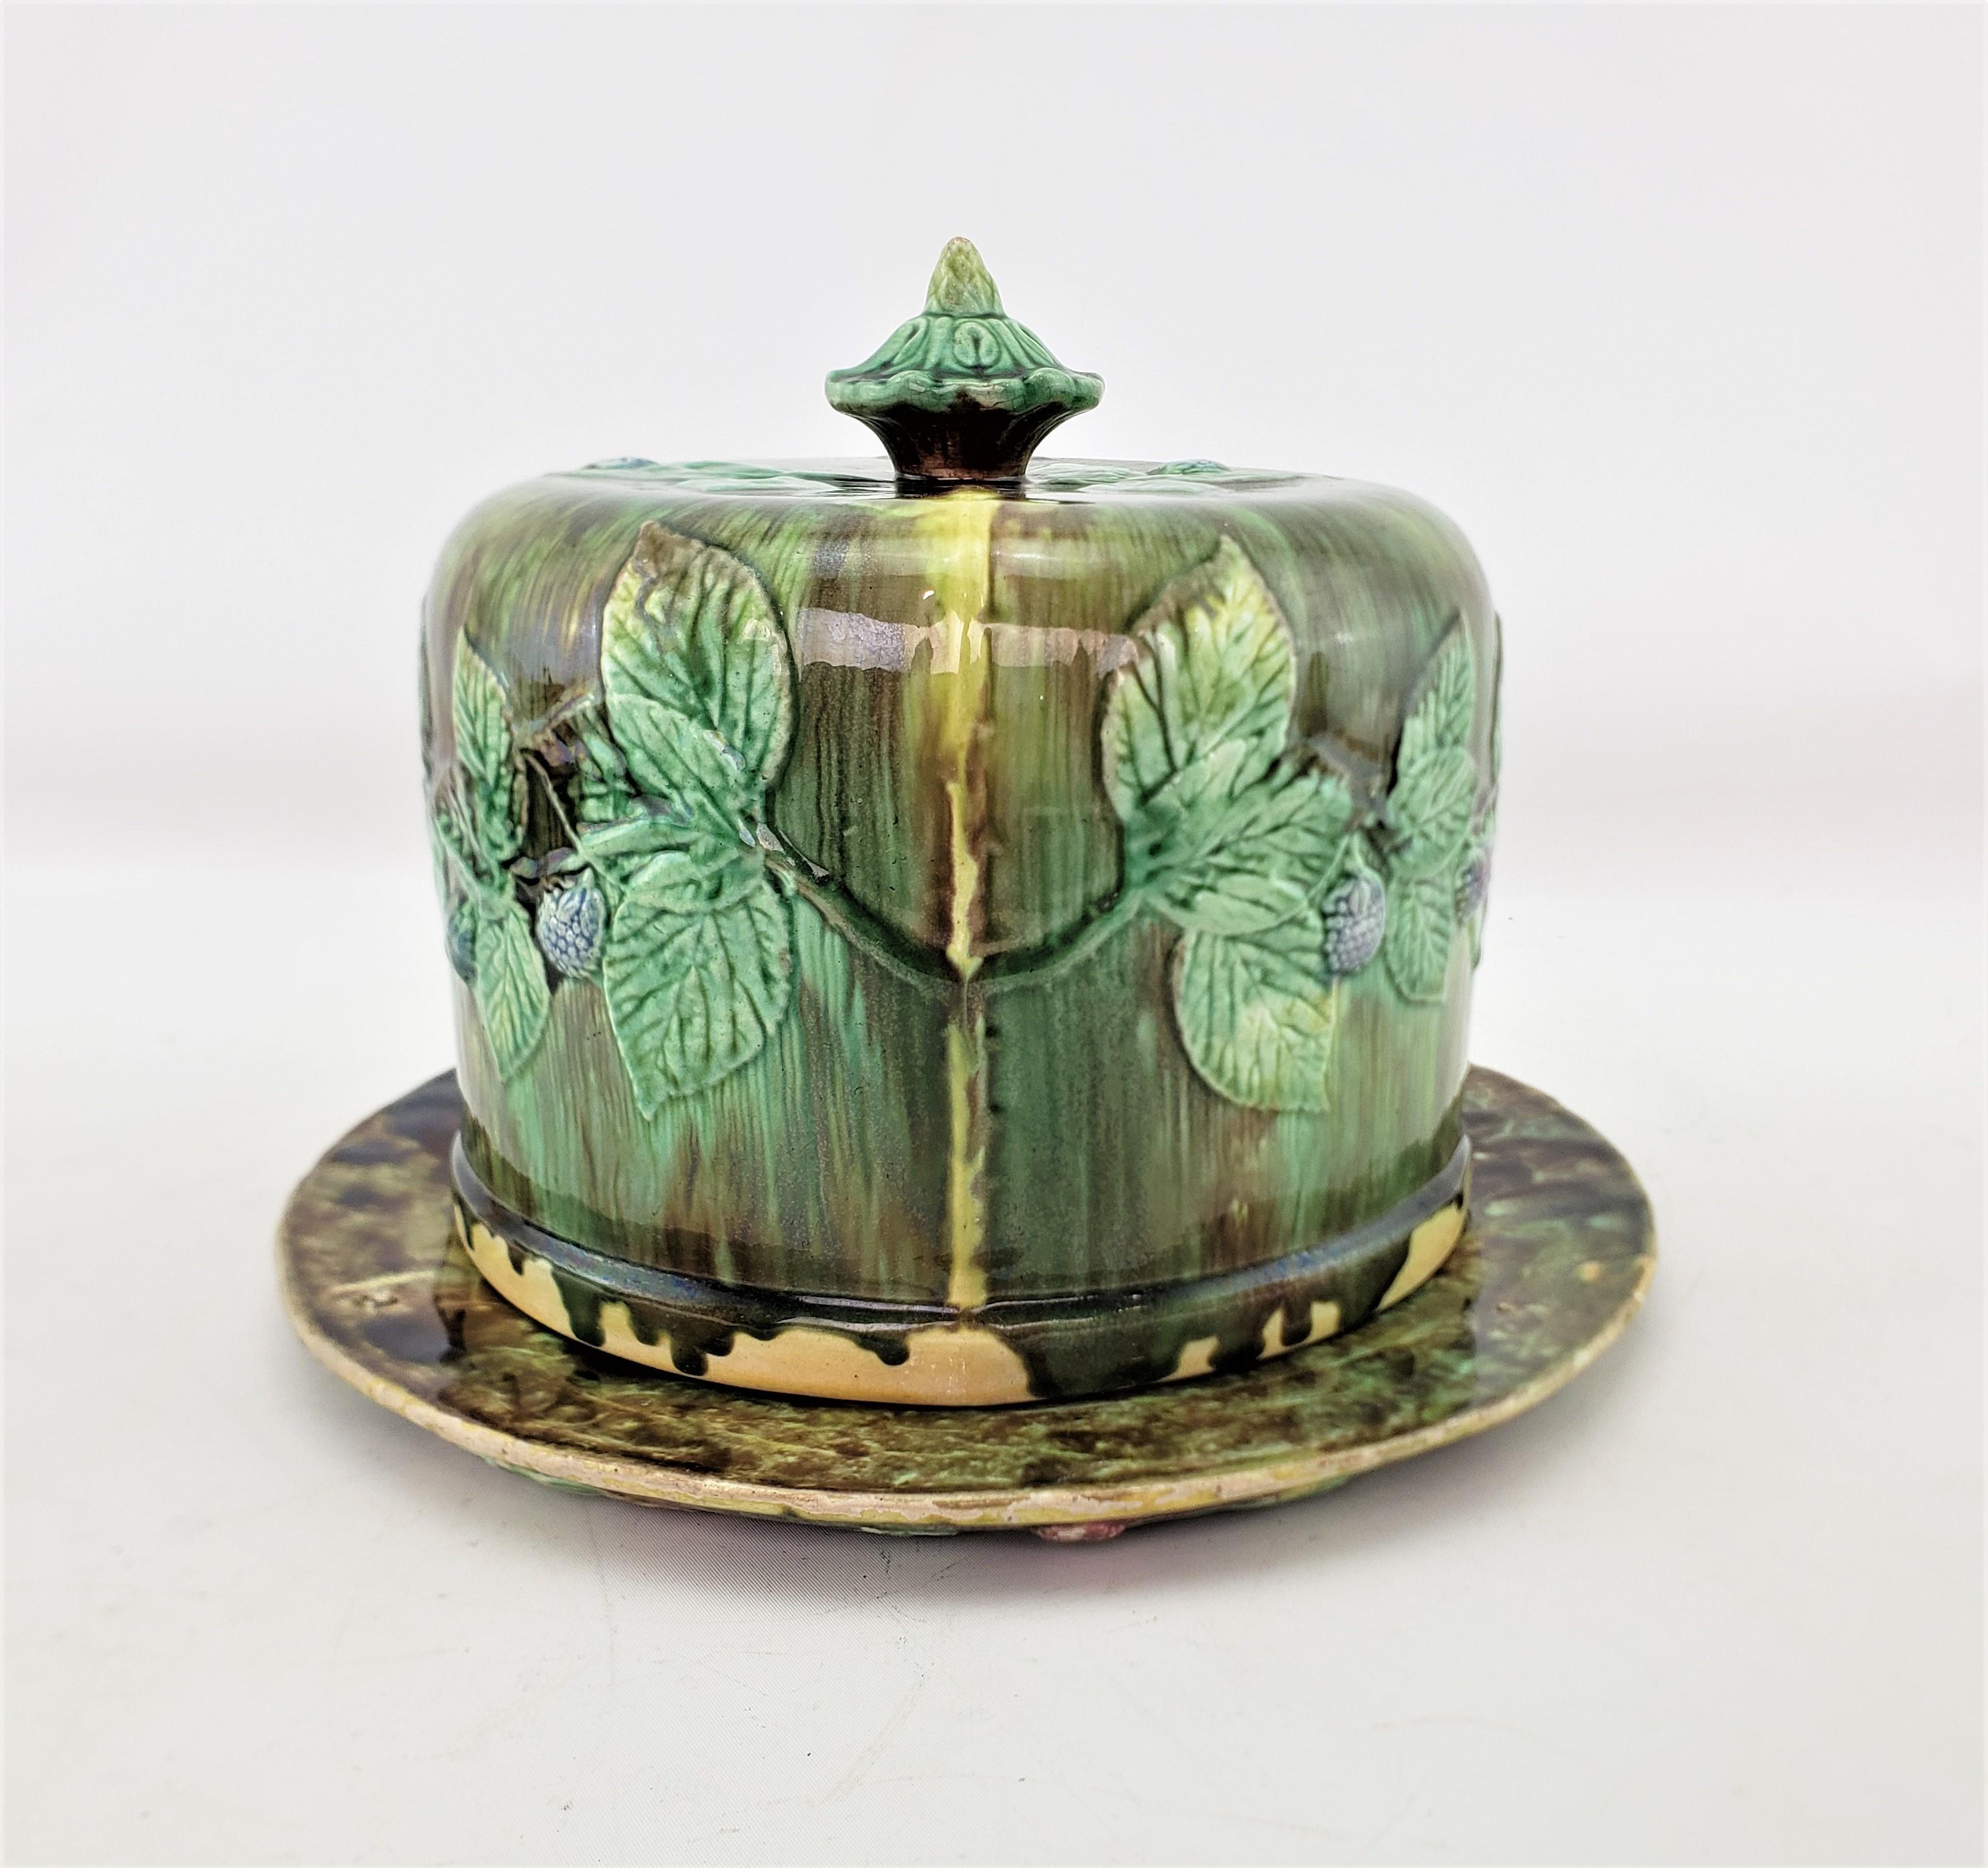 Large Antique Majolica Covered Cheese Server or Dome with Leaf & Berry Decor For Sale 3